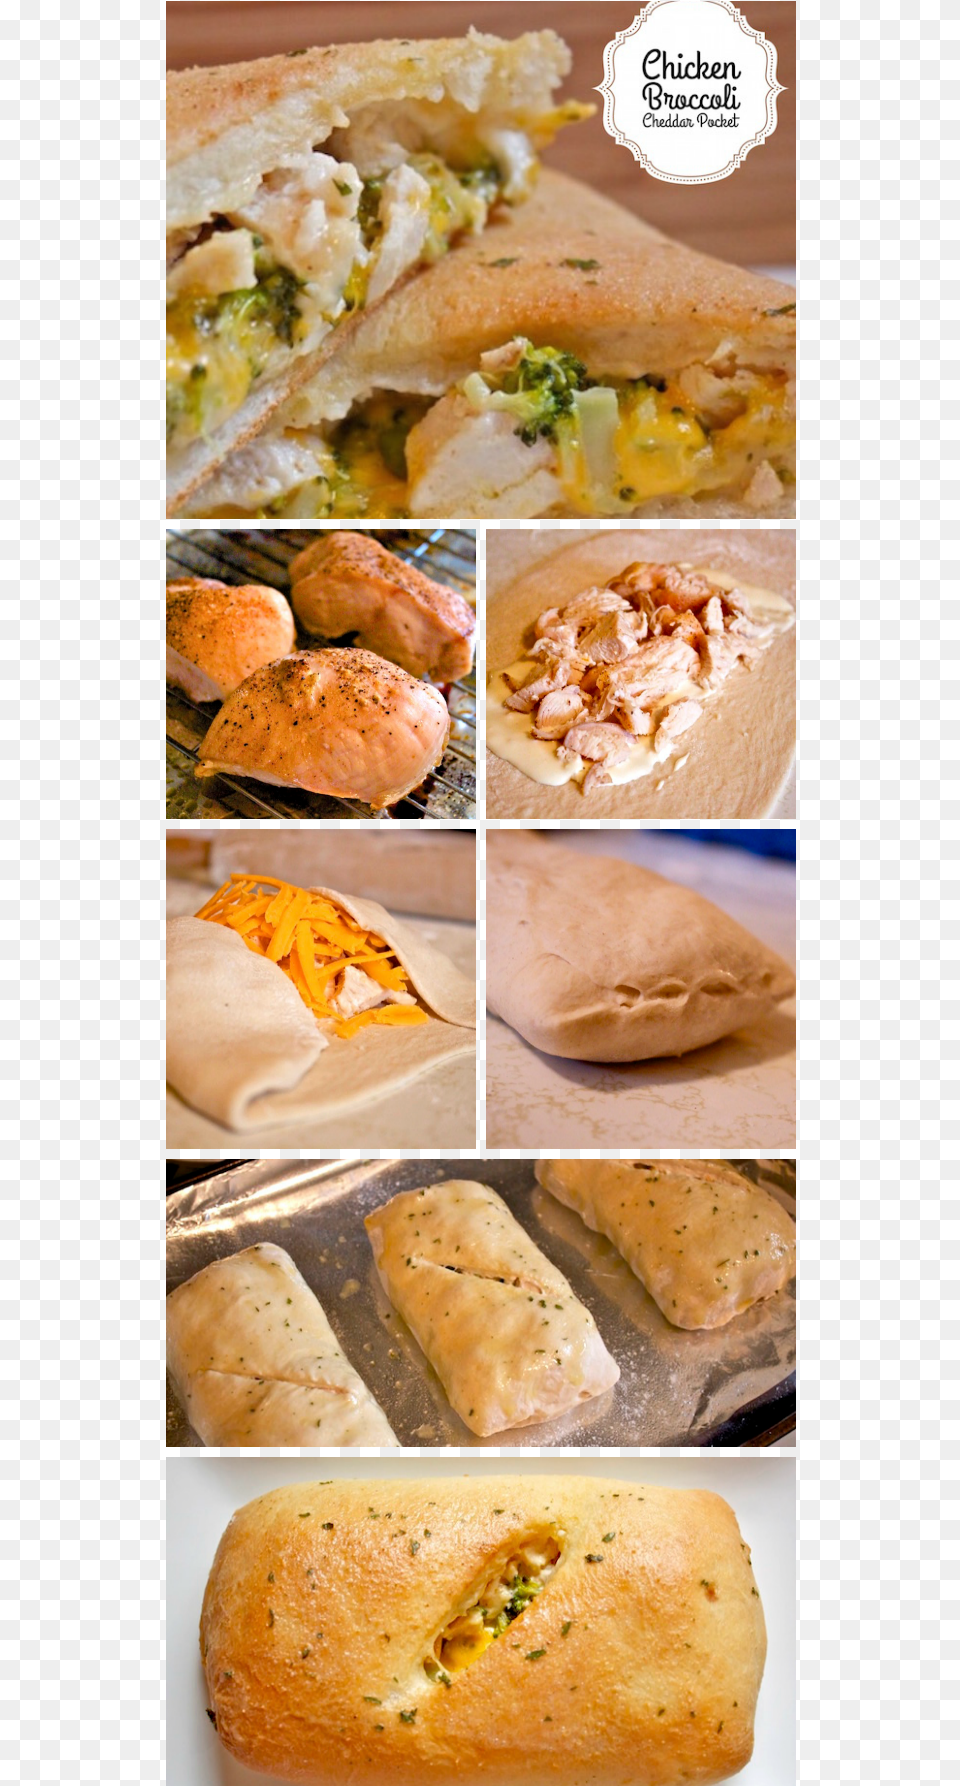 The Chicken Broccoli Cheddar Pocket Is A Homemade Hot Empanada, Bread, Food, Lunch, Meal Png Image